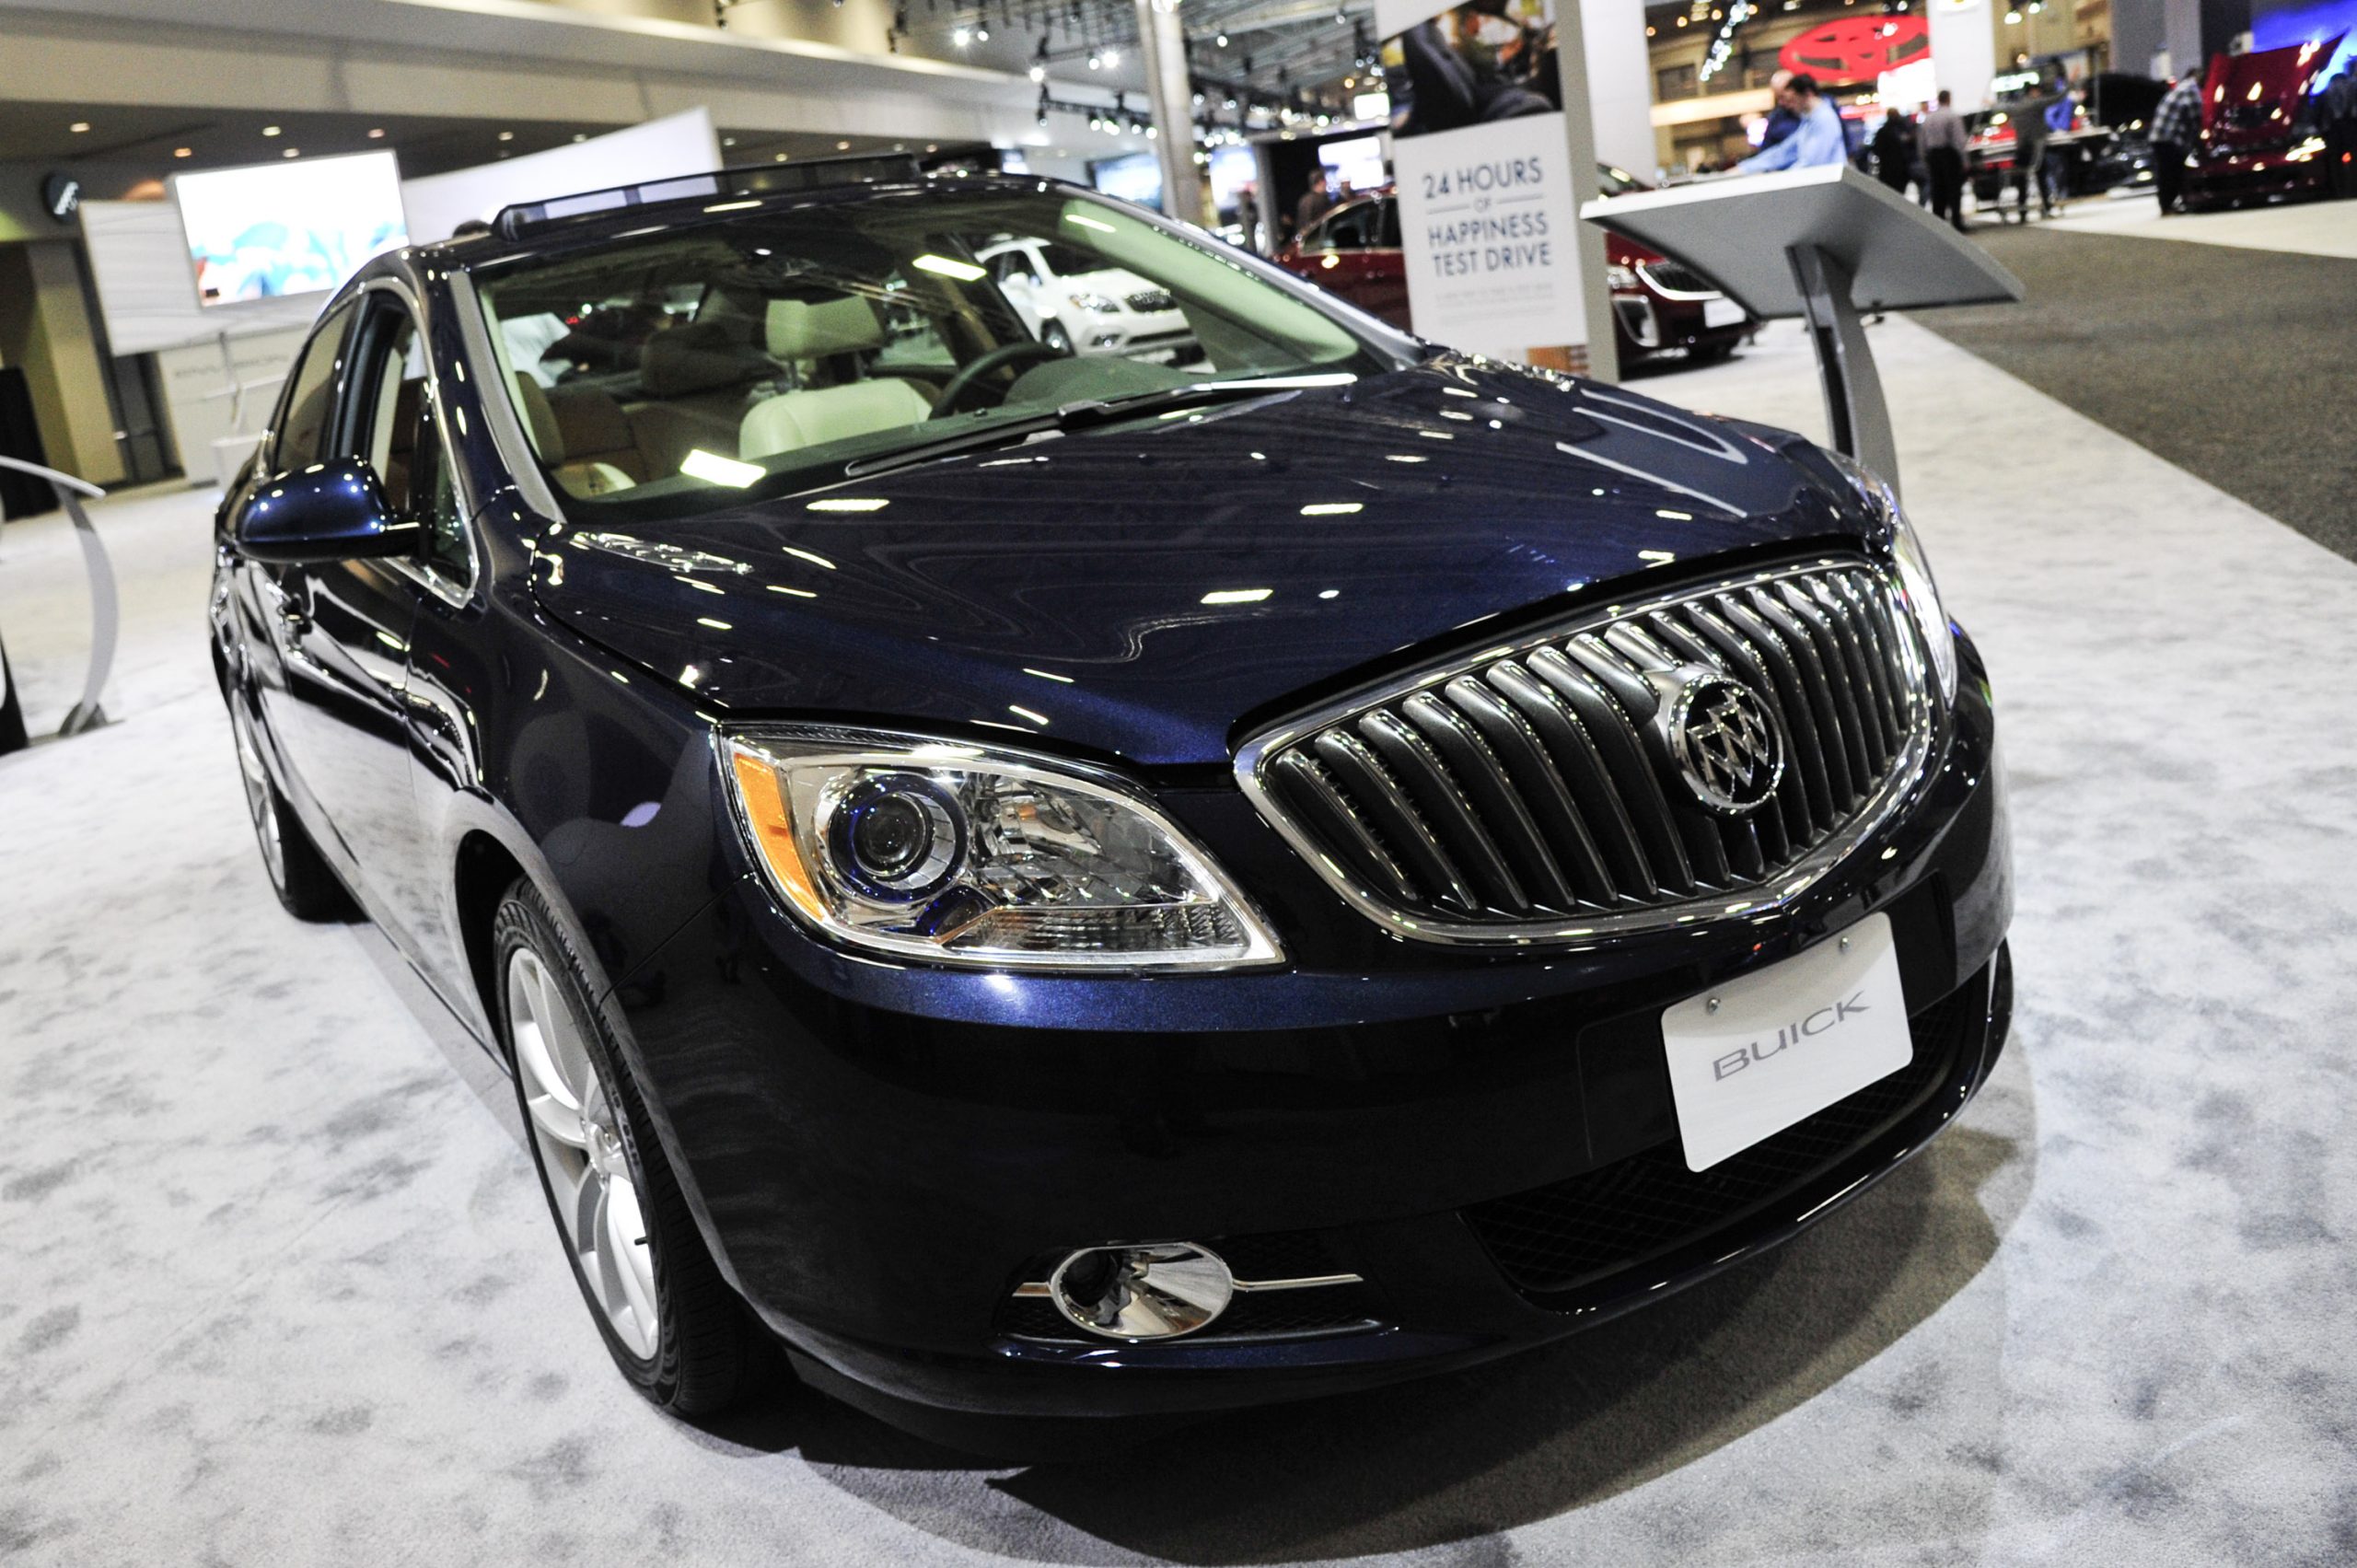 Why Did Buick Get Rid of the Verano?